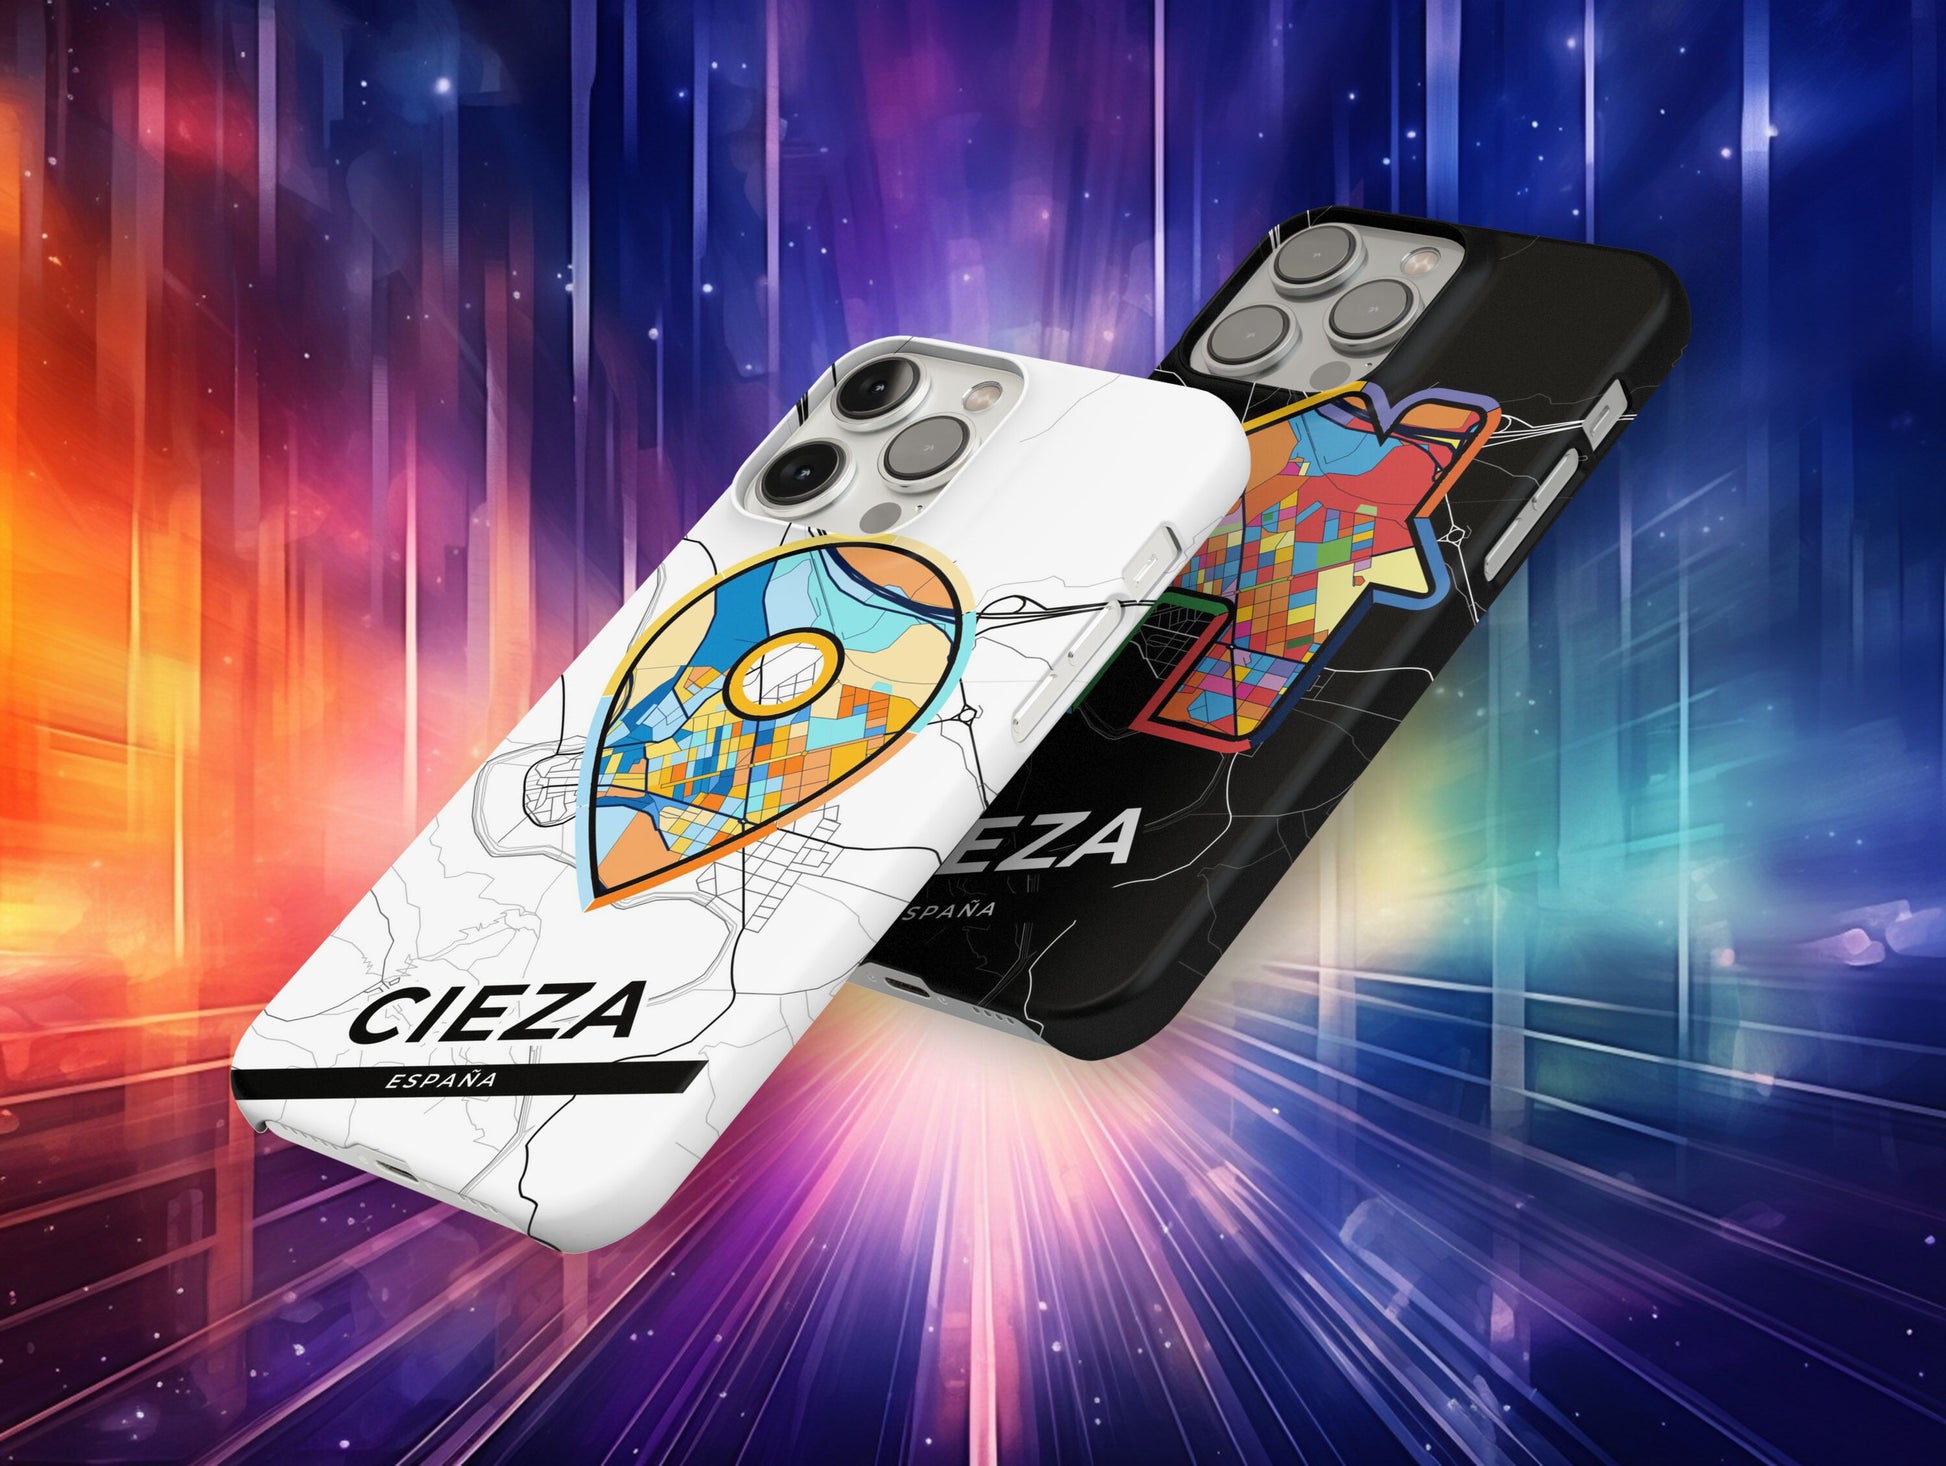 Cieza Spain slim phone case with colorful icon. Birthday, wedding or housewarming gift. Couple match cases.